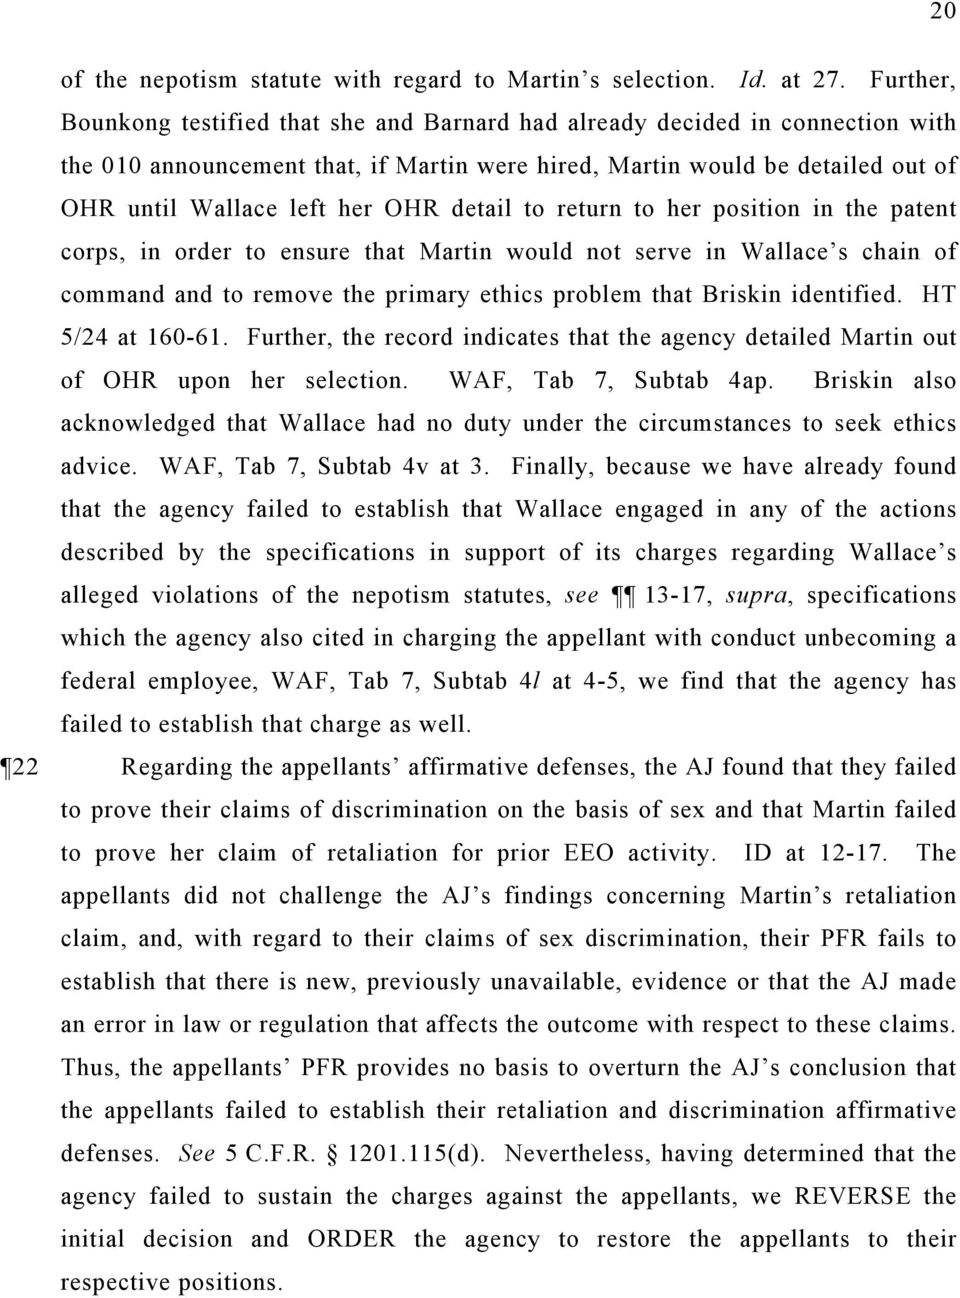 detail to return to her position in the patent corps, in order to ensure that Martin would not serve in Wallace s chain of command and to remove the primary ethics problem that Briskin identified.